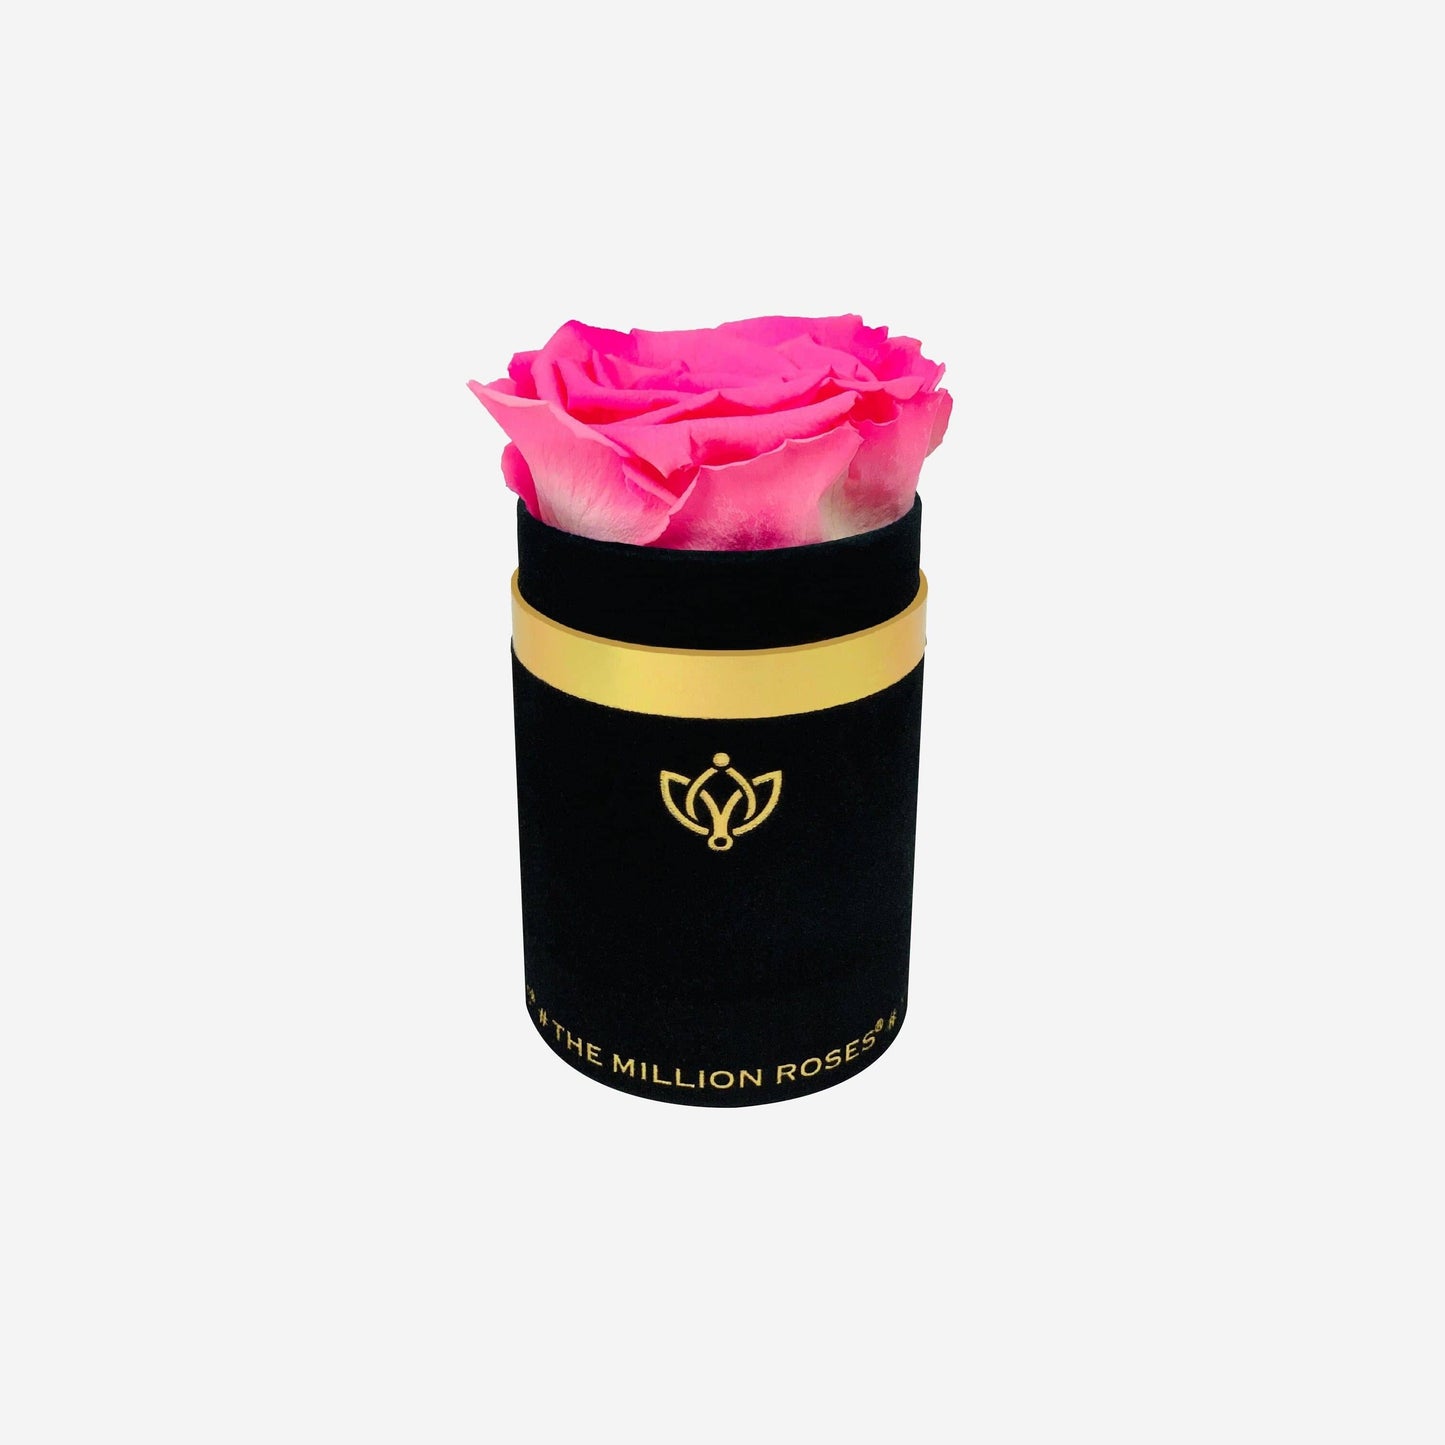 Single Black Suede Box | Candy Pink Rose - The Million Roses